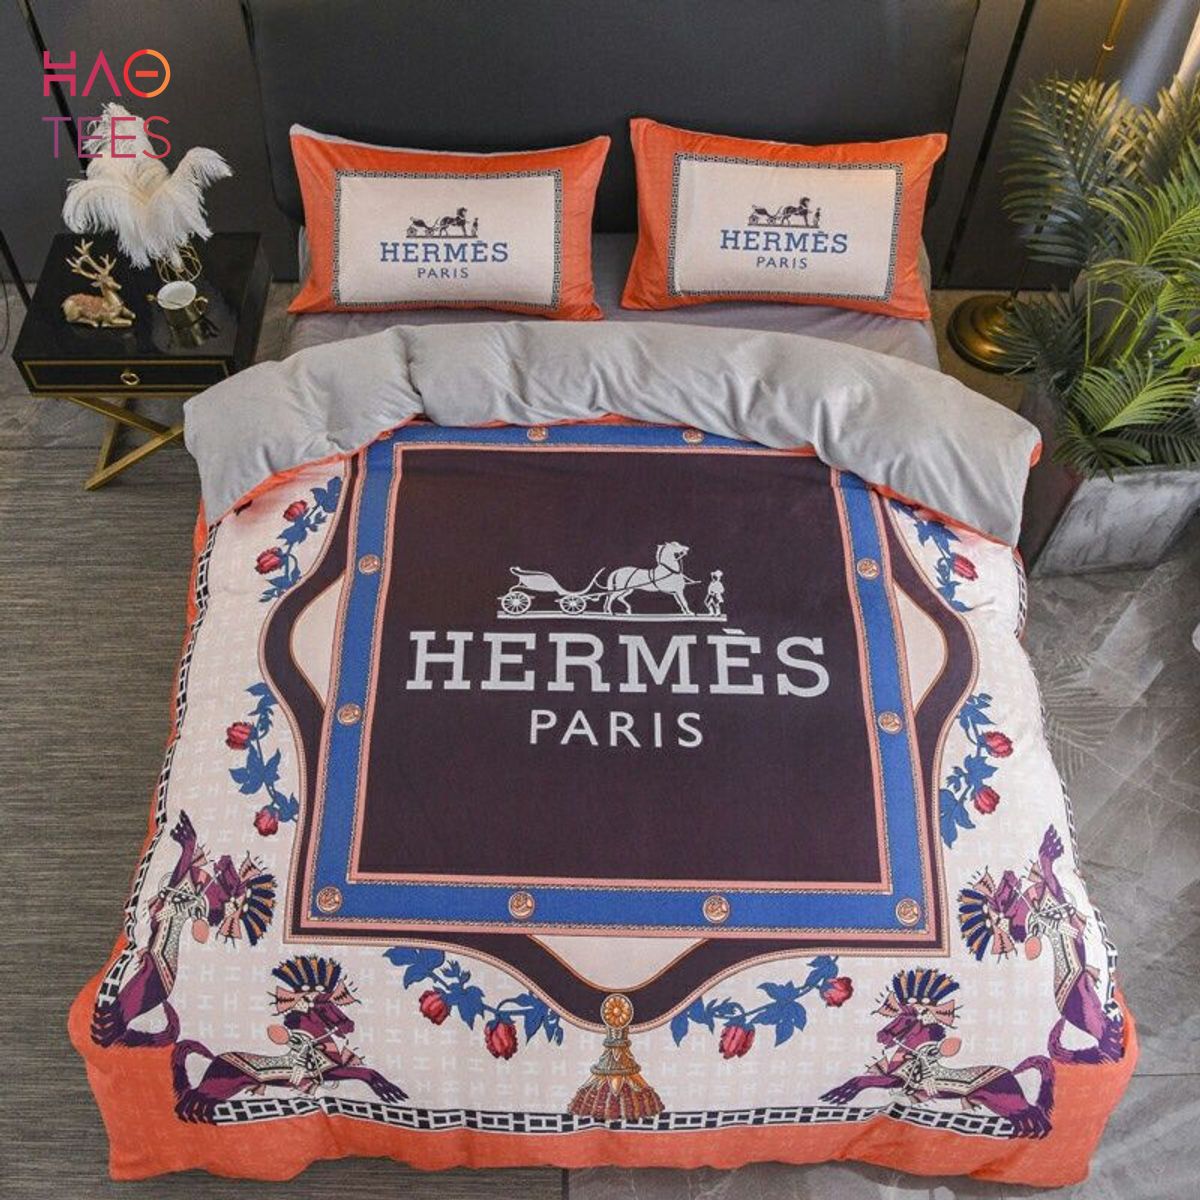 NEW Hermes Paris Luxury Brand Bedding Sets And Bedroom Sets